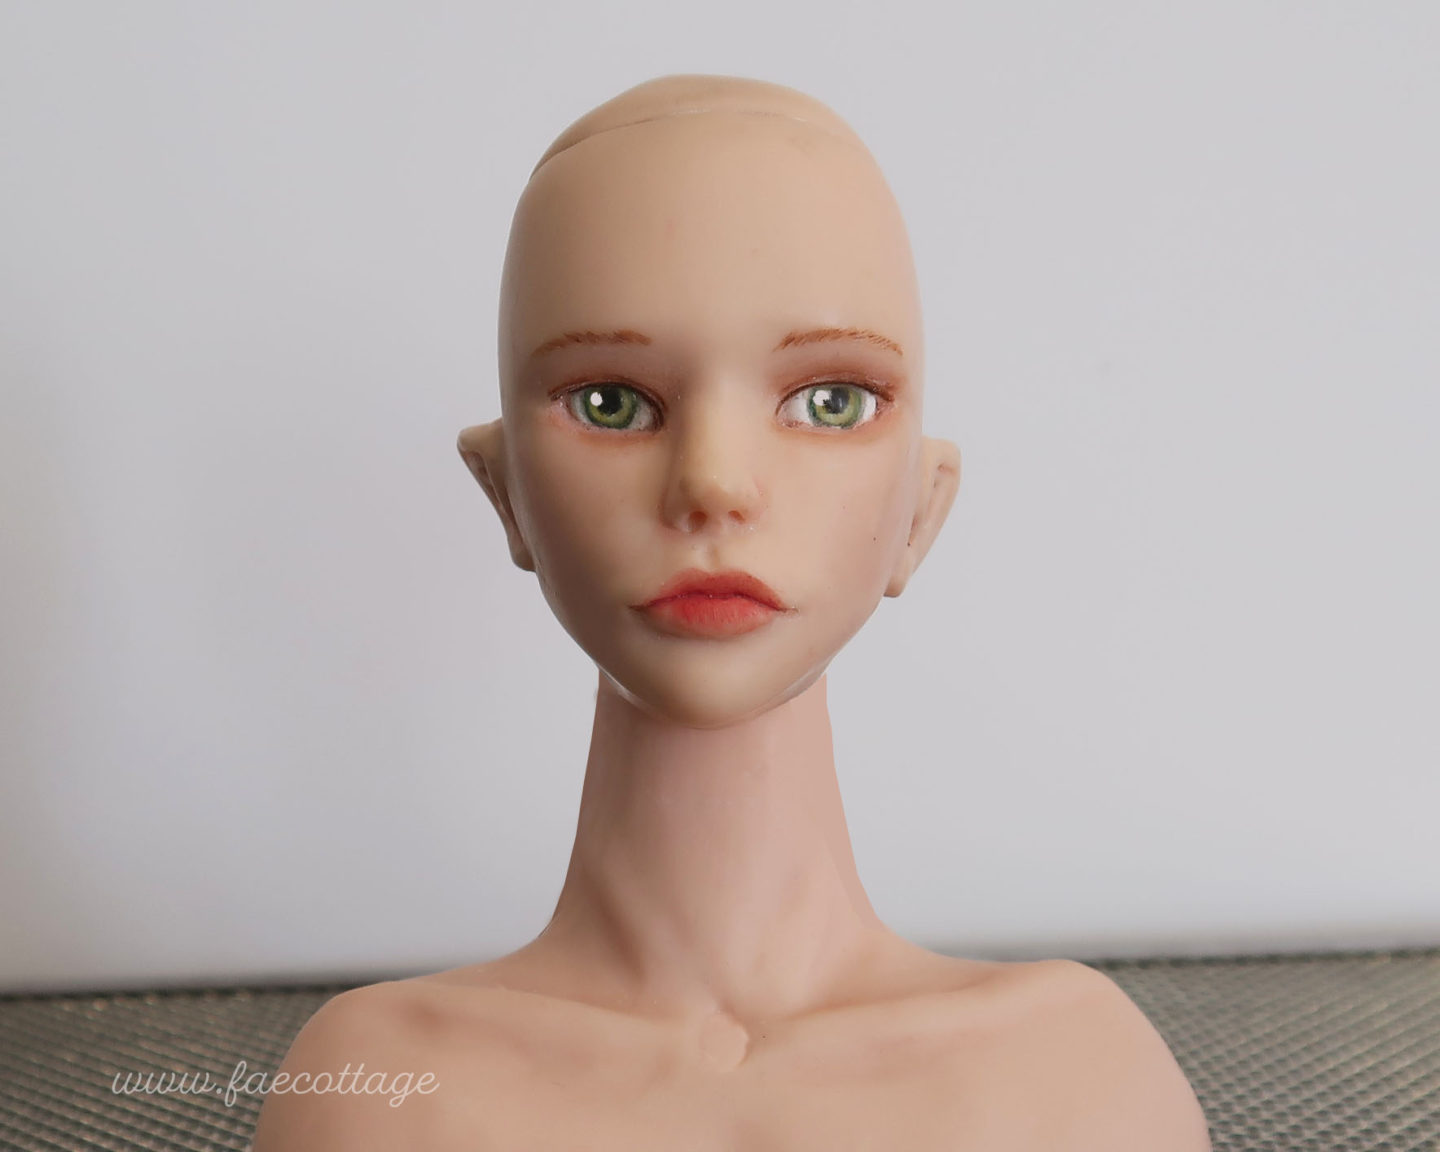 Should you learn to sculpt a BJD?  Careful, dolls can change your life!